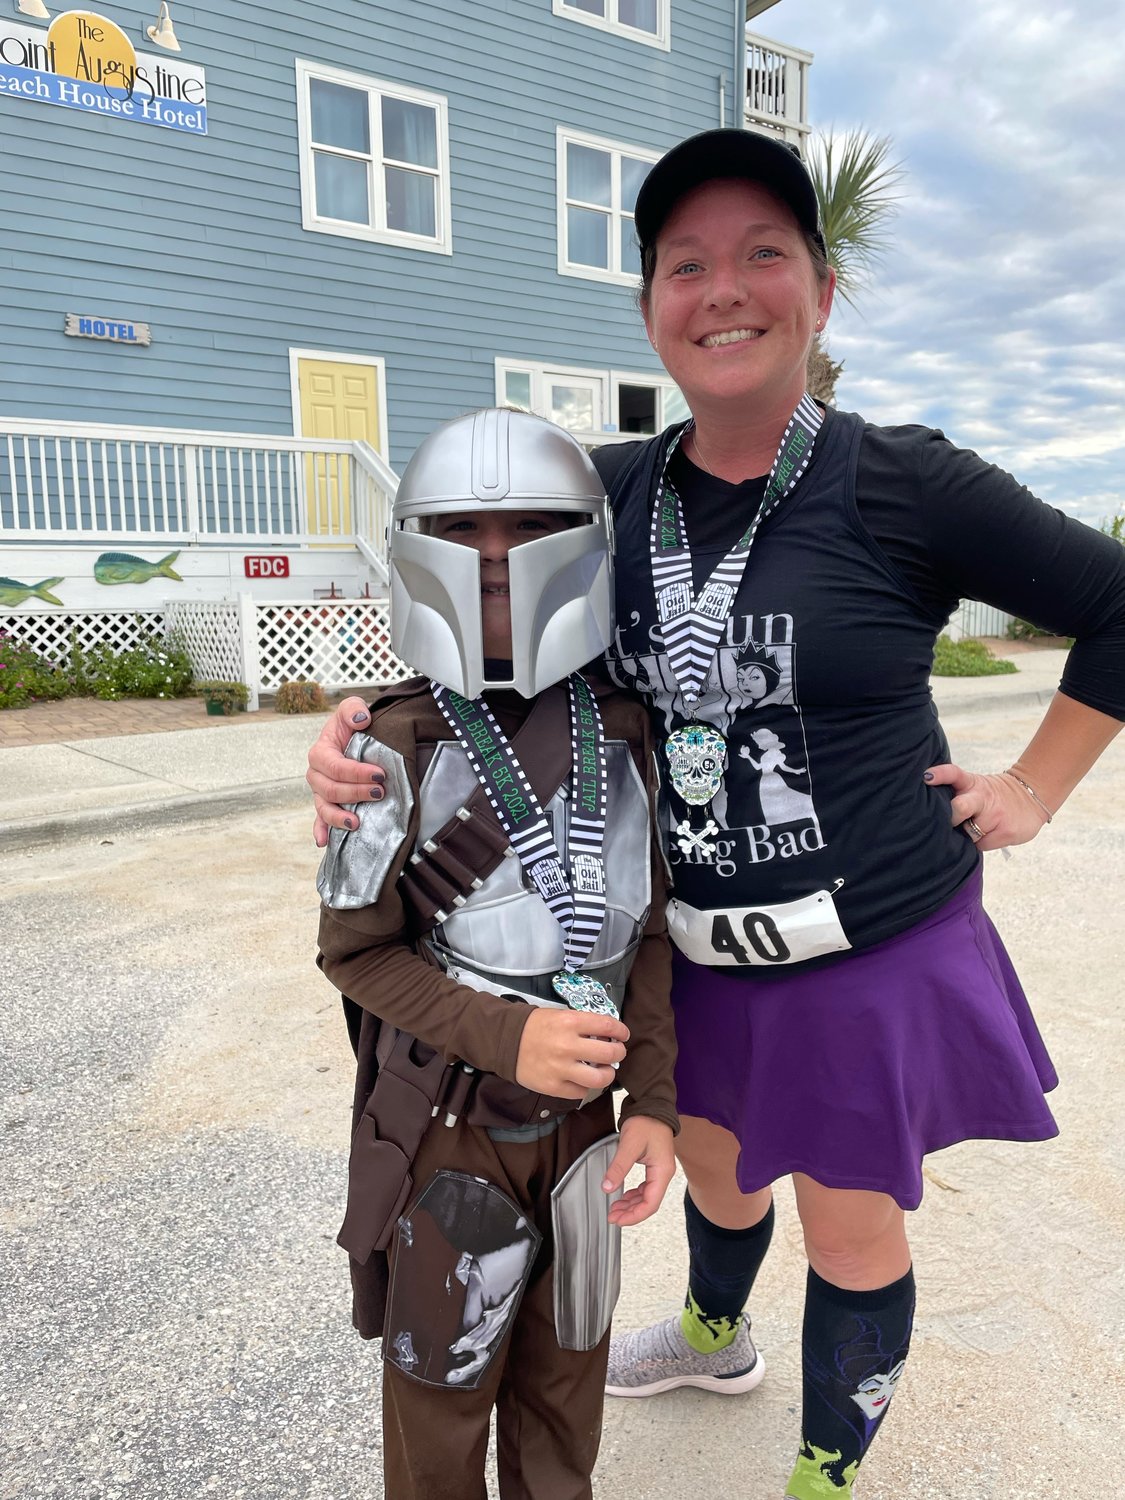 H. Bozard, 7, of St. Augustine ran the race with his mother Stephanie Bozard. He won second place in Halloween costume contest.